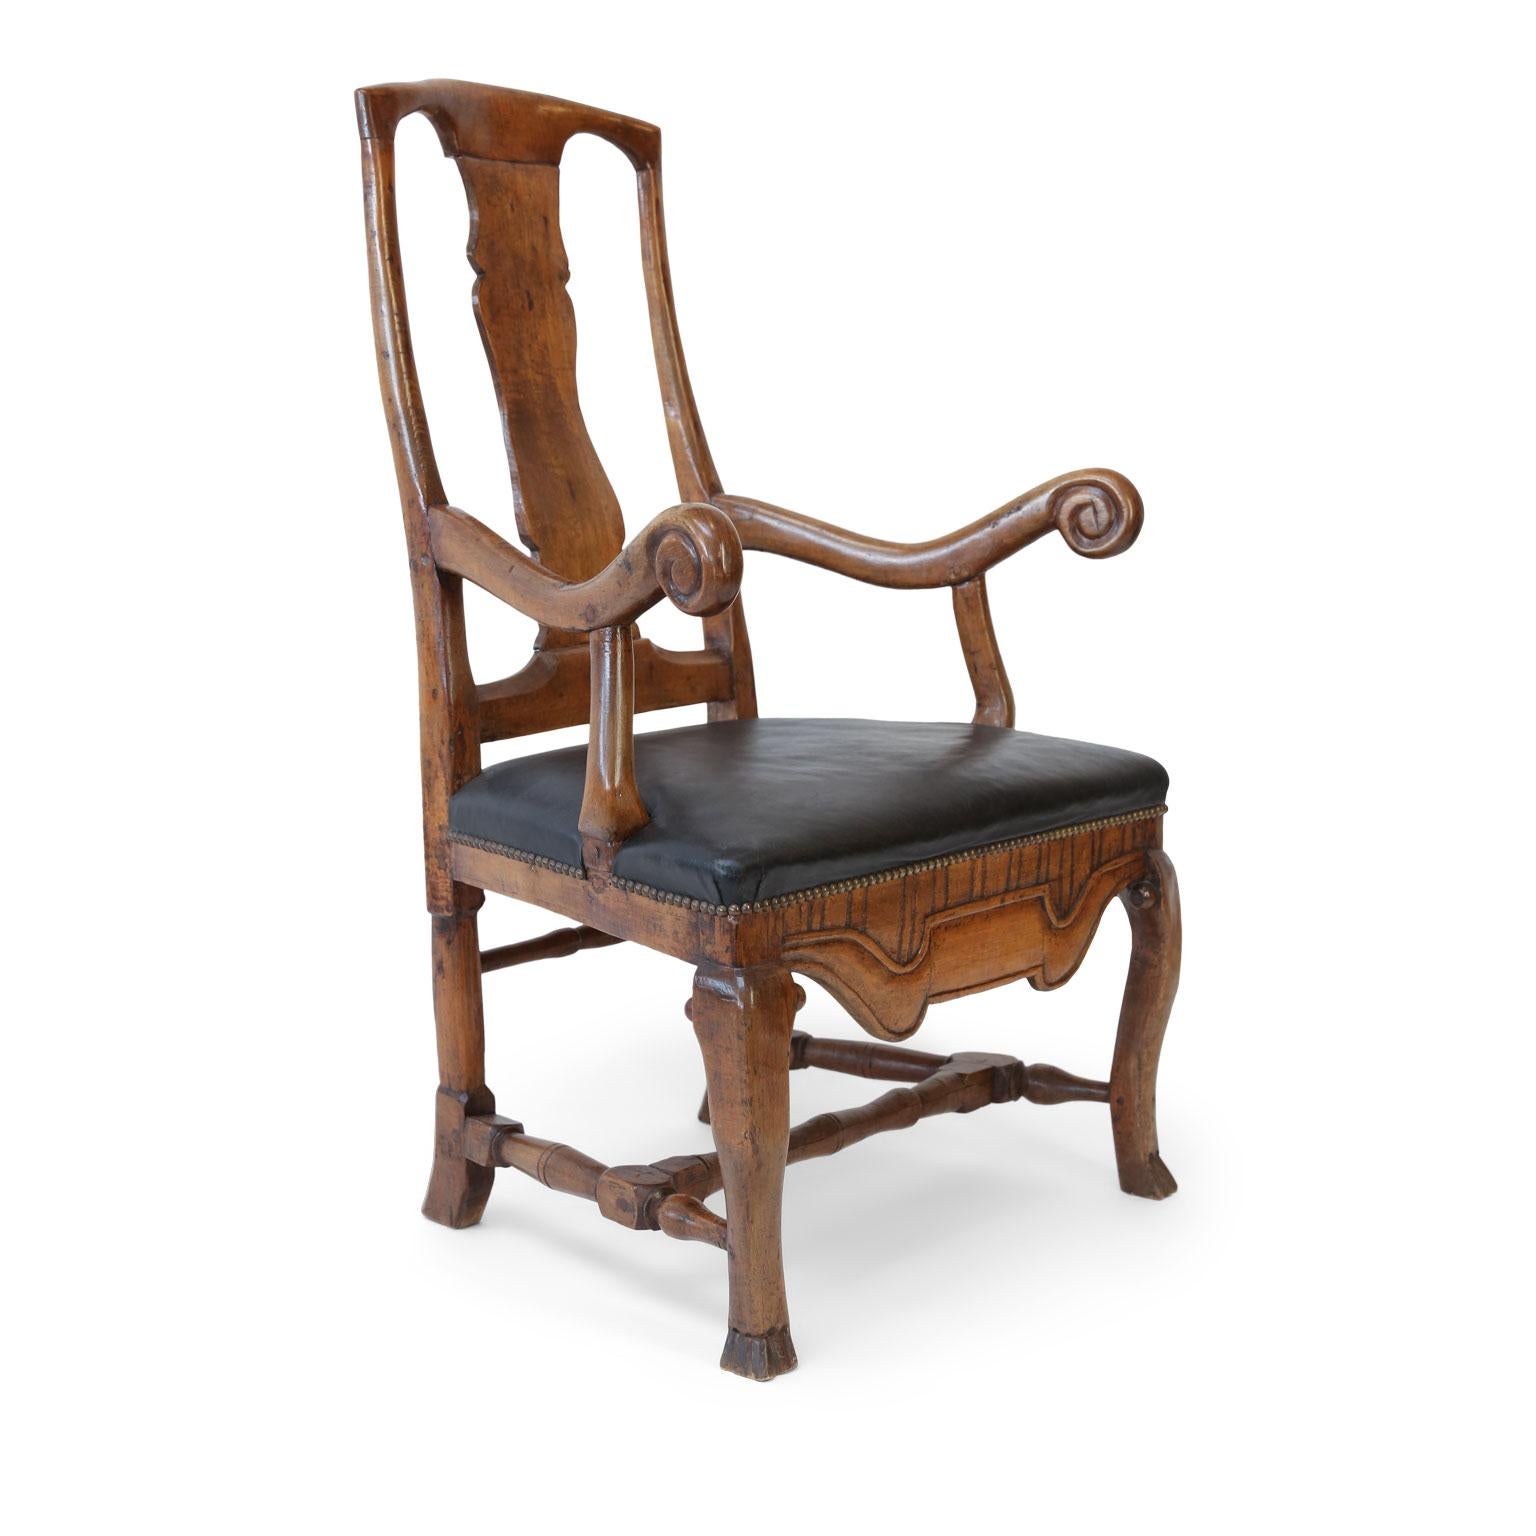 Large Baroque Swedish armchair well-carved in generous proportions, dating circa 1710-1730. Features a curved splat back, cabriole legs, Braganza feet and hand carved stretchers (not turned), seat covered in later black leather. Uneven lines and